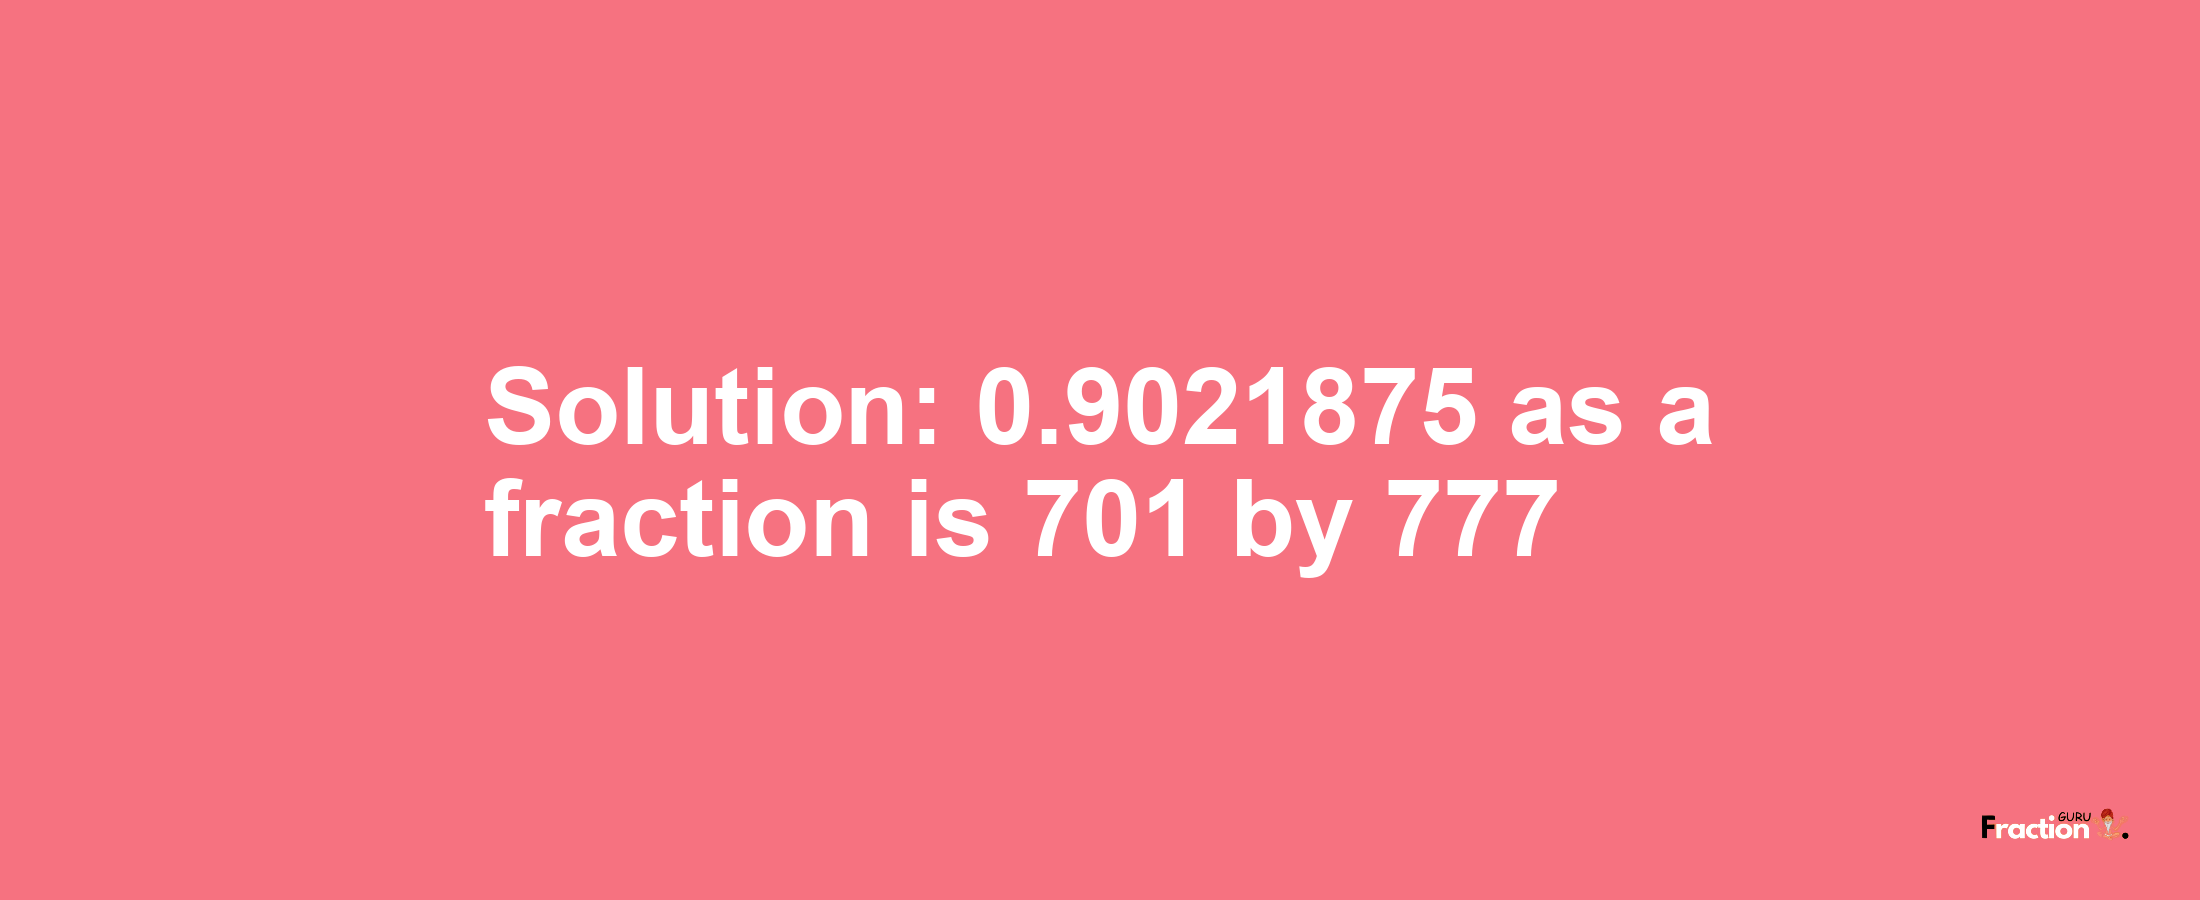 Solution:0.9021875 as a fraction is 701/777